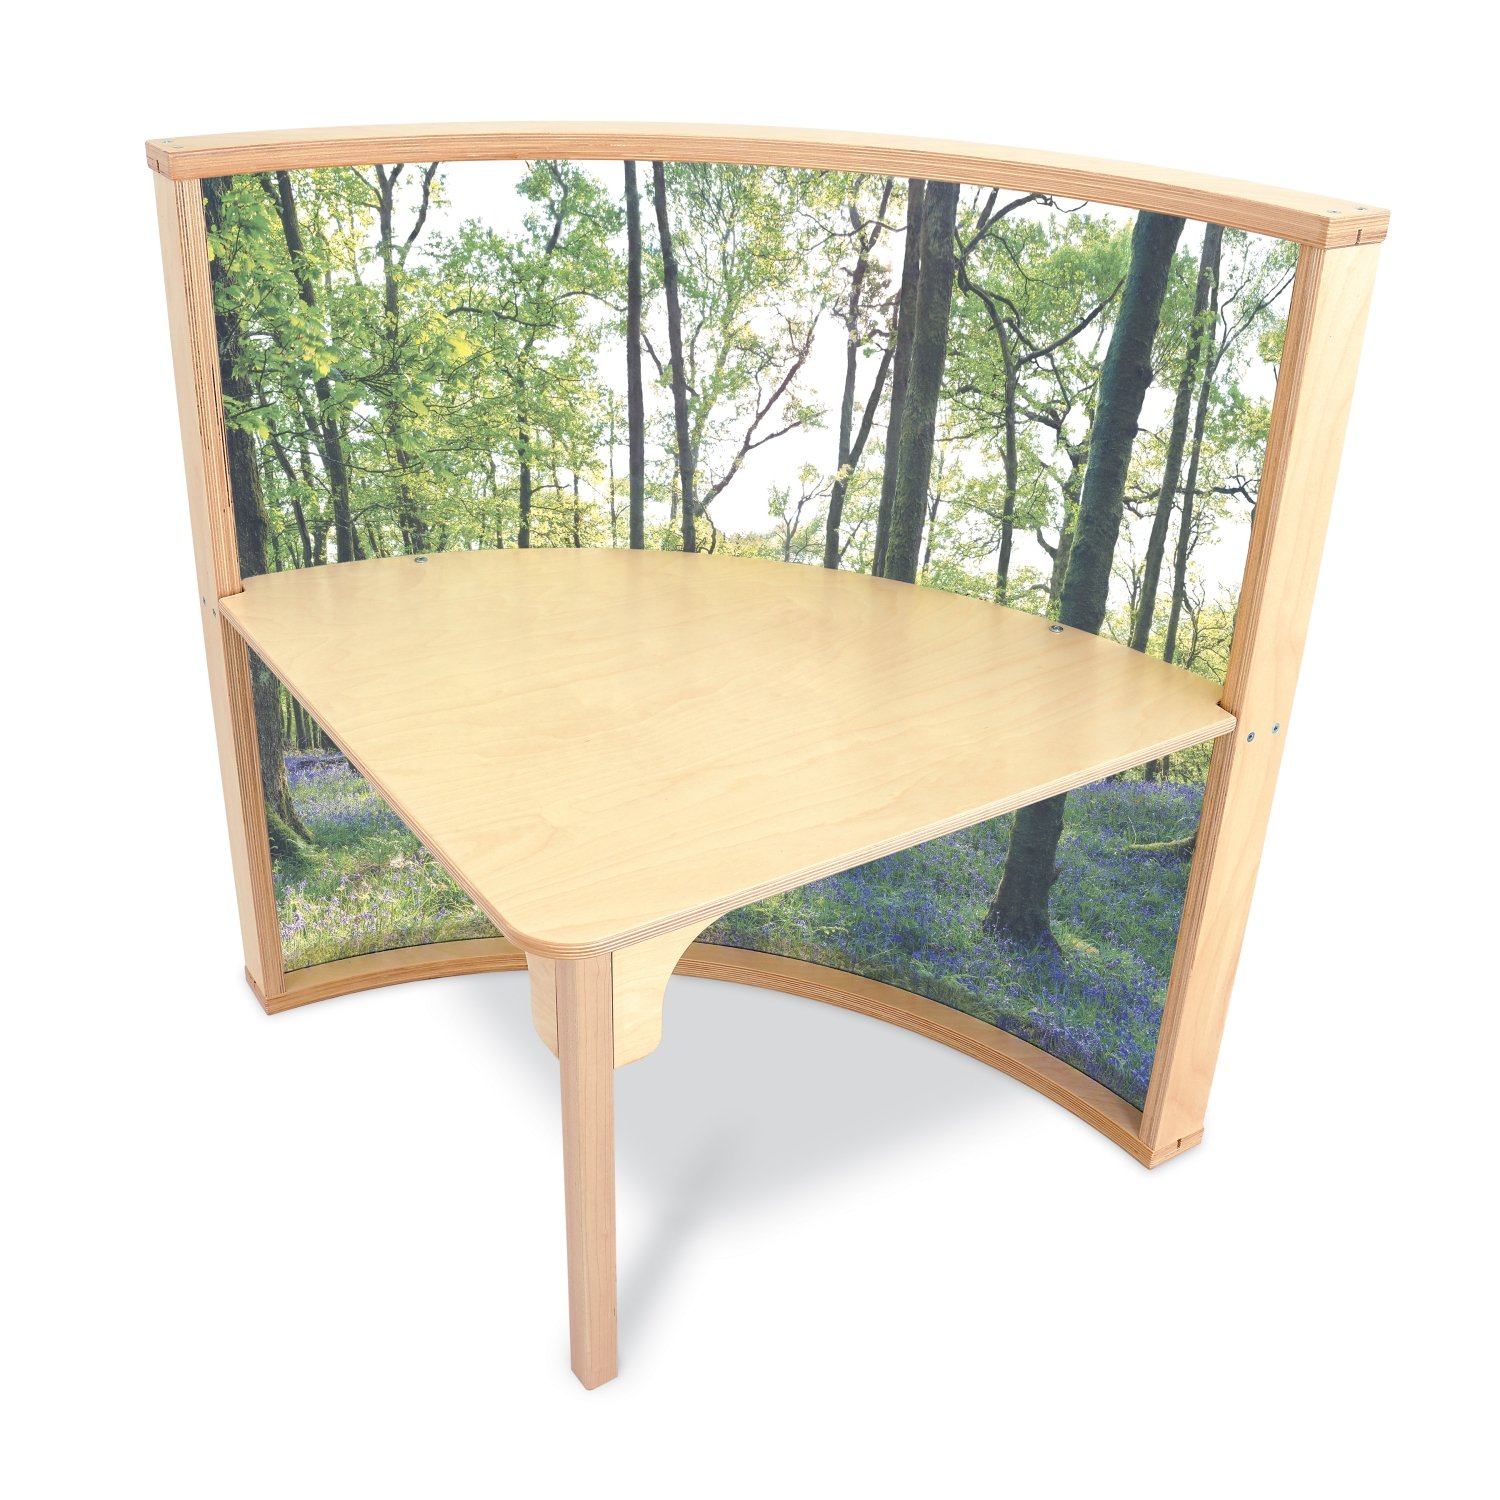 Value wood Furniture for Child care Centres and classrooms in